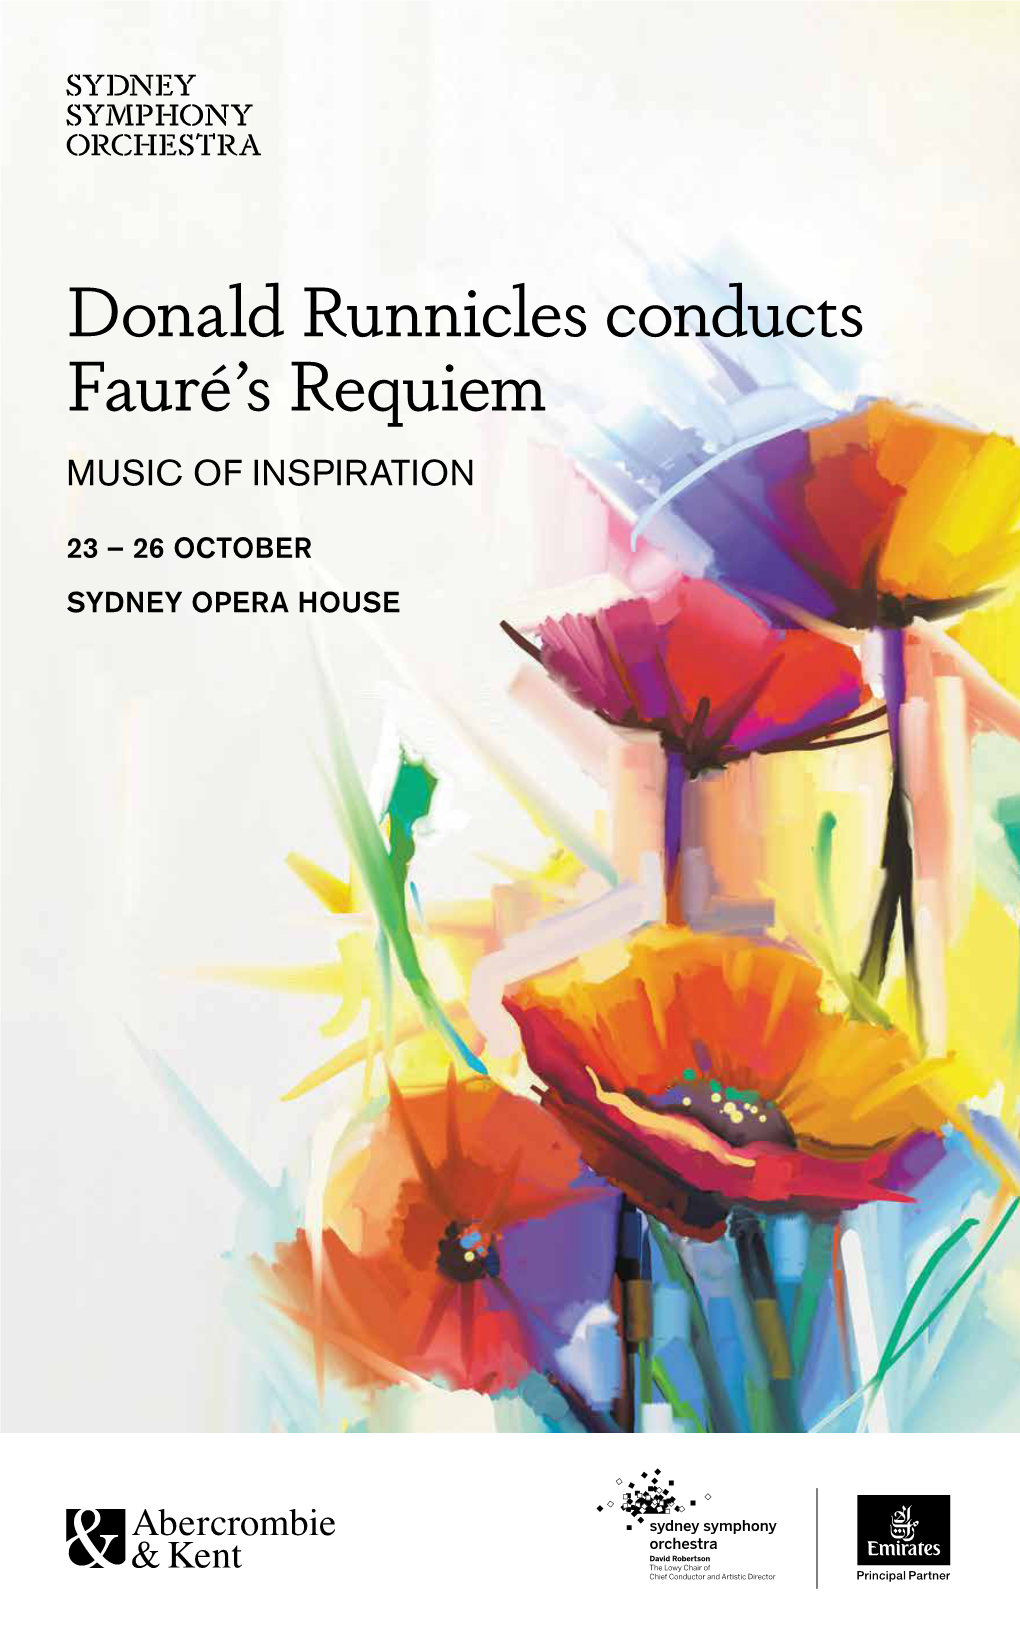 Donald Runnicles Conducts Fauré's Requiem